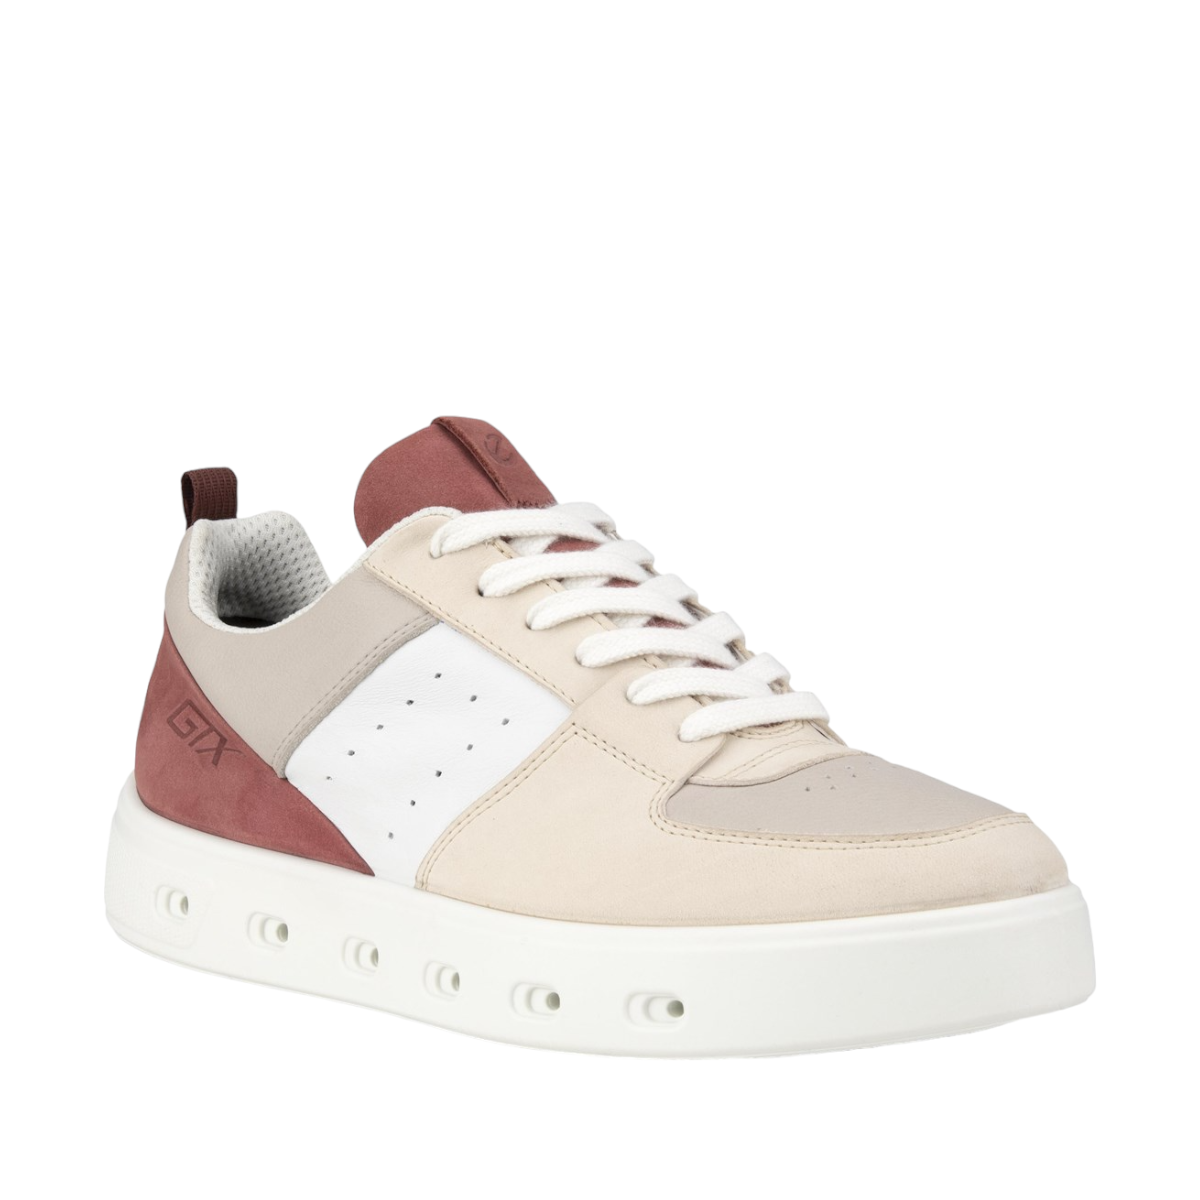 Shop Street 720 W - with shoe&me - from Ecco - Sneakers - Sneakers, Winter, Womens